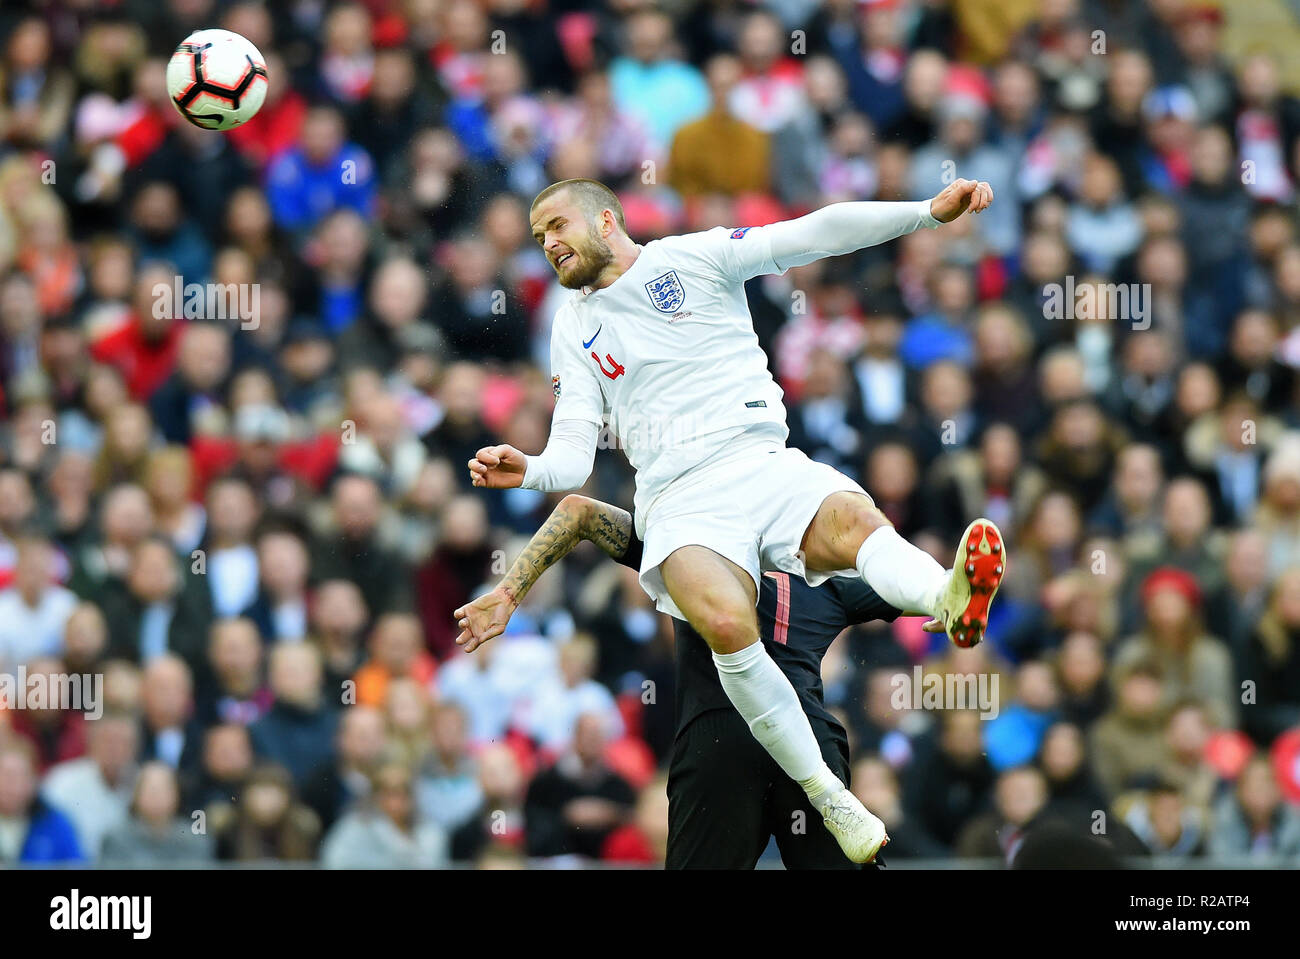 London, UK. 18th November 2018. England midfielder Eric Dier (4) gets up for the header during the UEFA Nations League match between England and Croatia at Wembley Stadium, London on Sunday 18th November 2018. (©MI News & Sport Ltd | Alamy Live News) Stock Photo